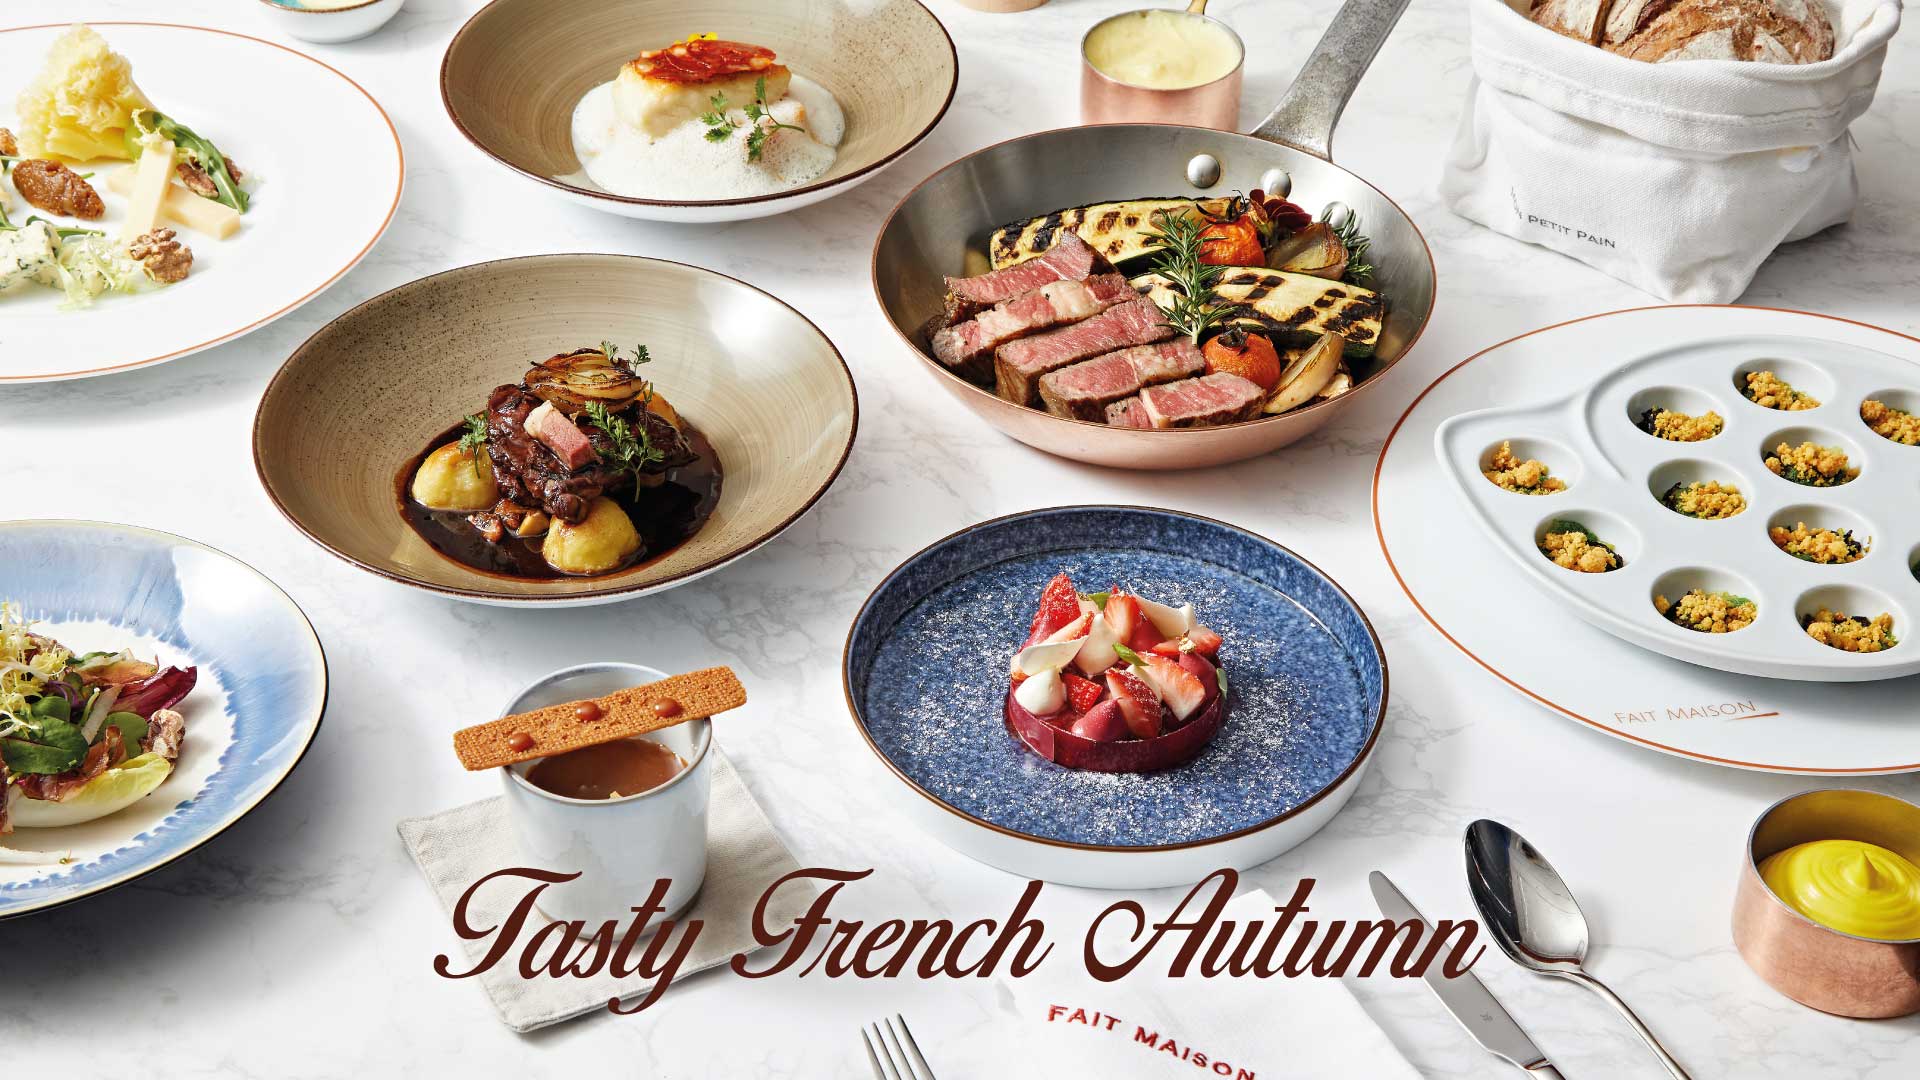 gastronomy-package-tasty-french-autumn